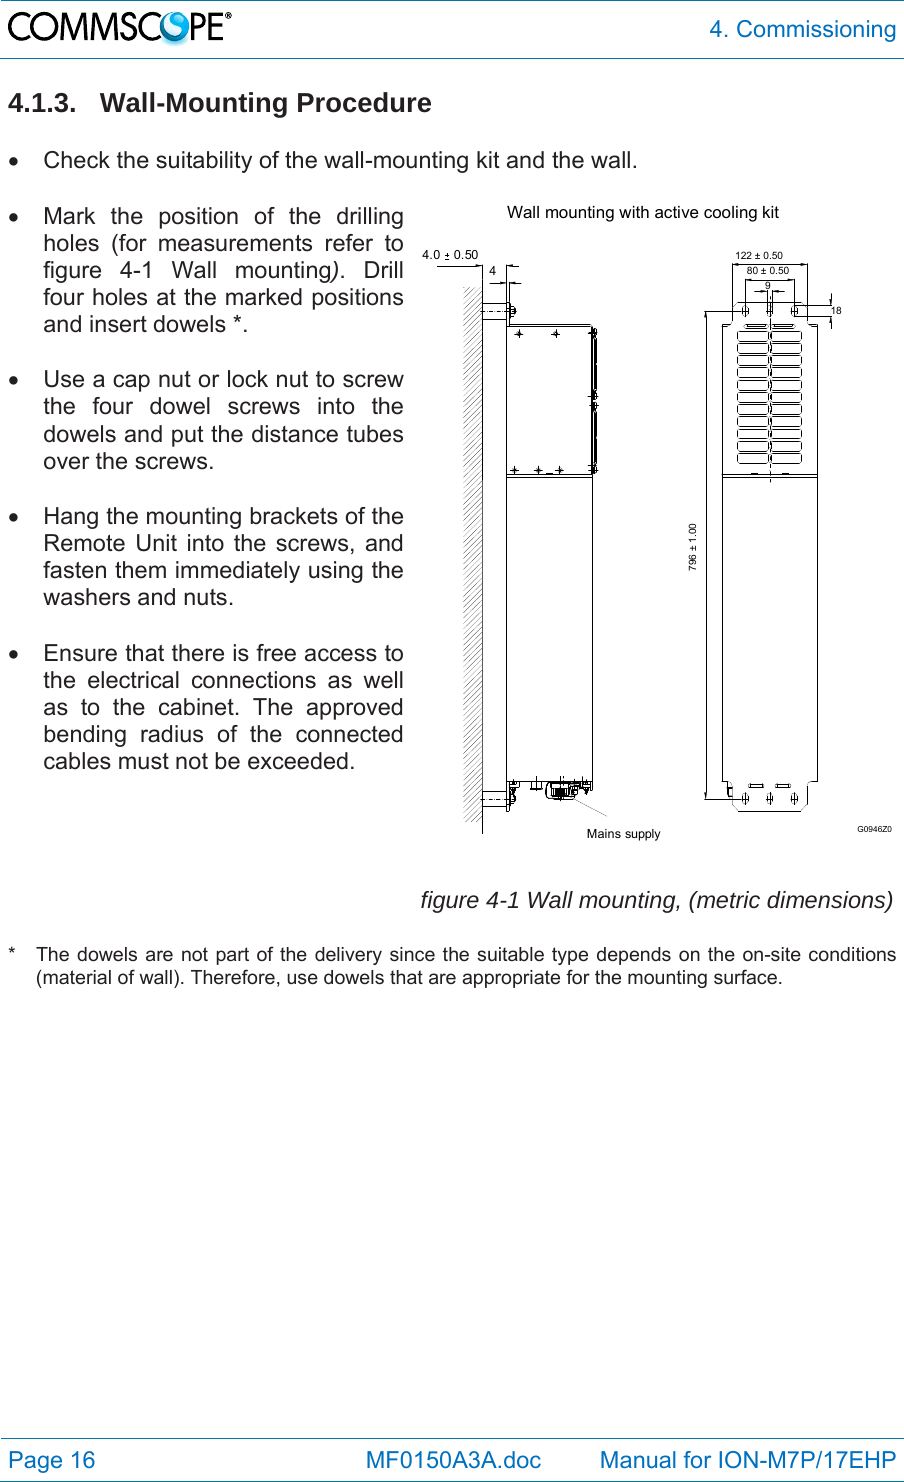  4. Commissioning Page 16            MF0150A3A.doc         Manual for ION-M7P/17EHP 4.1.3. Wall-Mounting Procedure    Check the suitability of the wall-mounting kit and the wall.    Mark the position of the drilling holes (for measurements refer to figure 4-1 Wall mounting). Drill four holes at the marked positions and insert dowels *.    Use a cap nut or lock nut to screw the four dowel screws into the dowels and put the distance tubes over the screws.    Hang the mounting brackets of the Remote Unit into the screws, and fasten them immediately using the washers and nuts.    Ensure that there is free access to the electrical connections as well as to the cabinet. The approved bending radius of the connected cables must not be exceeded.   Wall mounting with active cooling kit4.0  0.504Mains supply980 ± 0.50122 ± 0.5018796 ± 1.00G0946Z0 figure 4-1 Wall mounting, (metric dimensions)*  The dowels are not part of the delivery since the suitable type depends on the on-site conditions (material of wall). Therefore, use dowels that are appropriate for the mounting surface.   